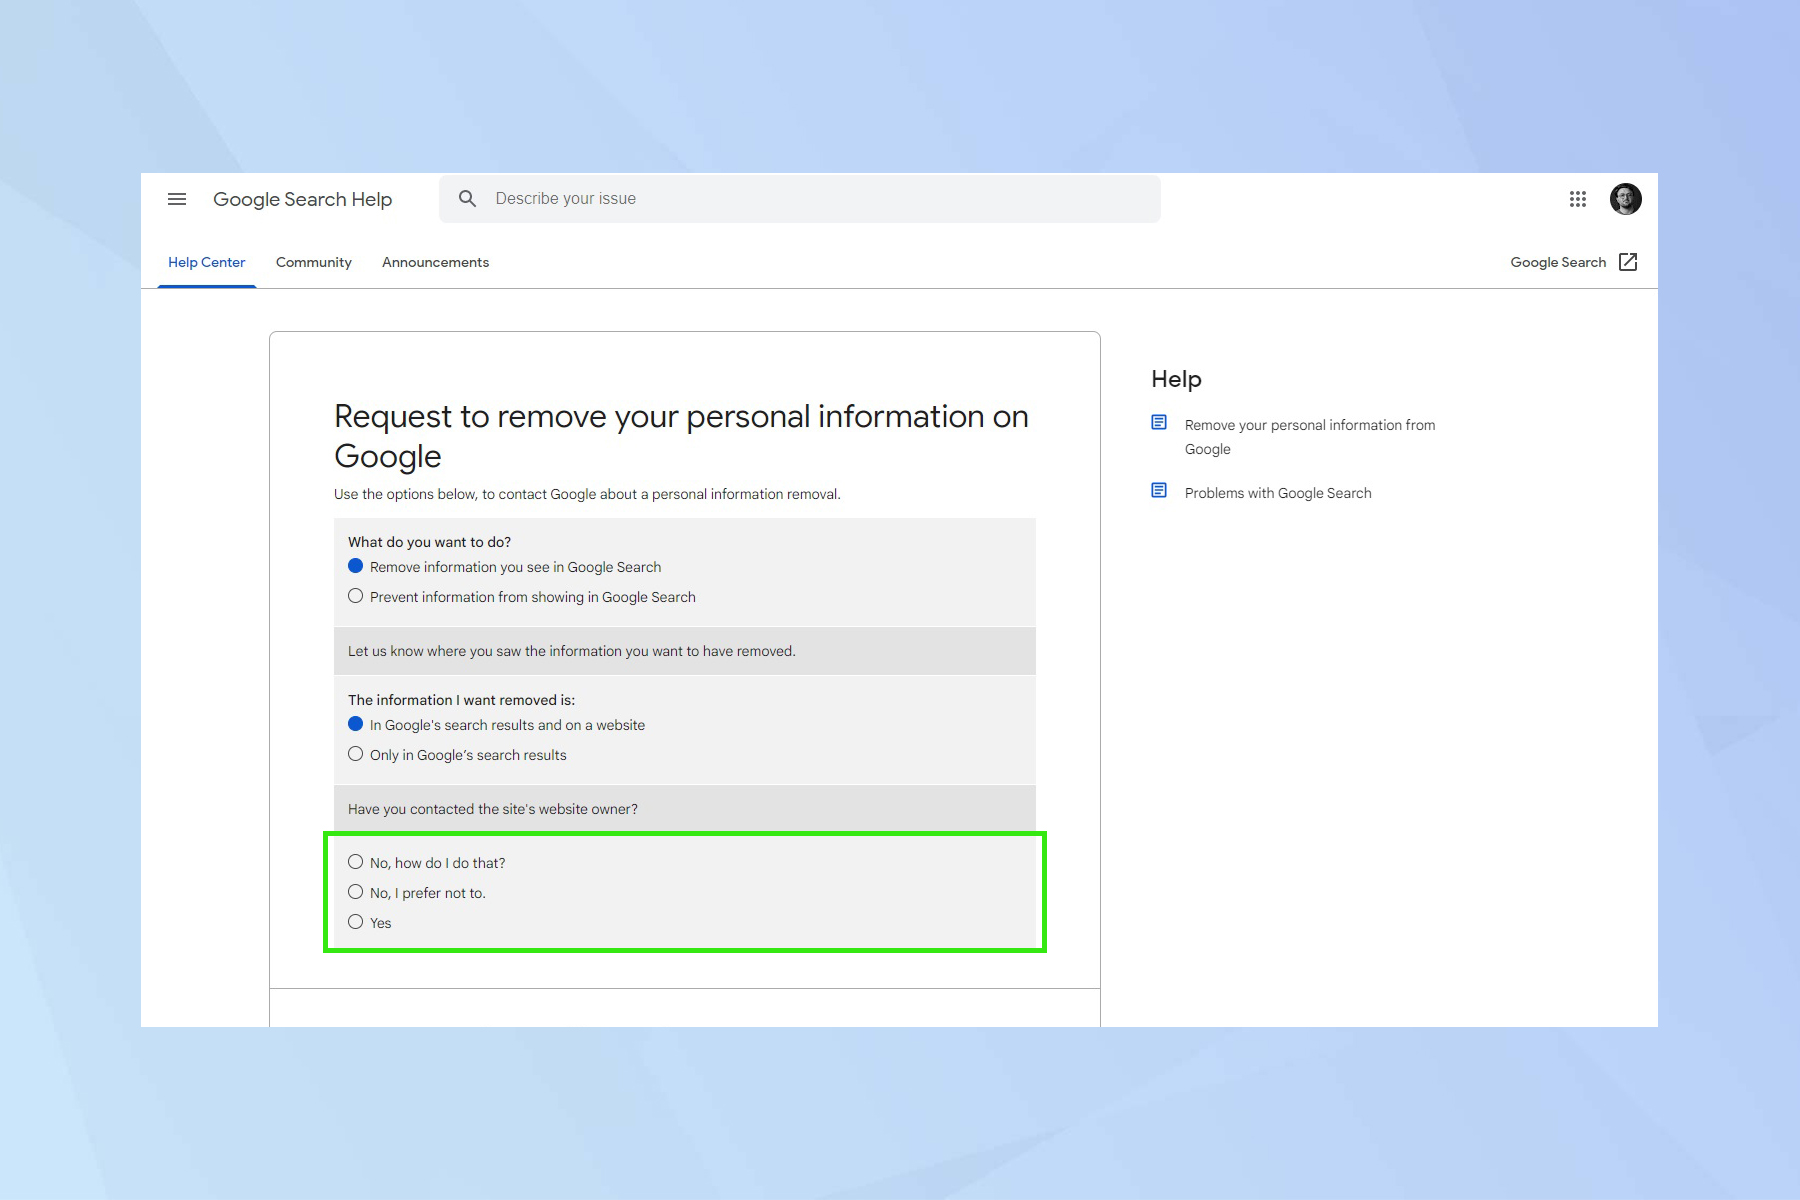 Screenshot showing the removal form from Google search - showing how to remove contact details from Google search